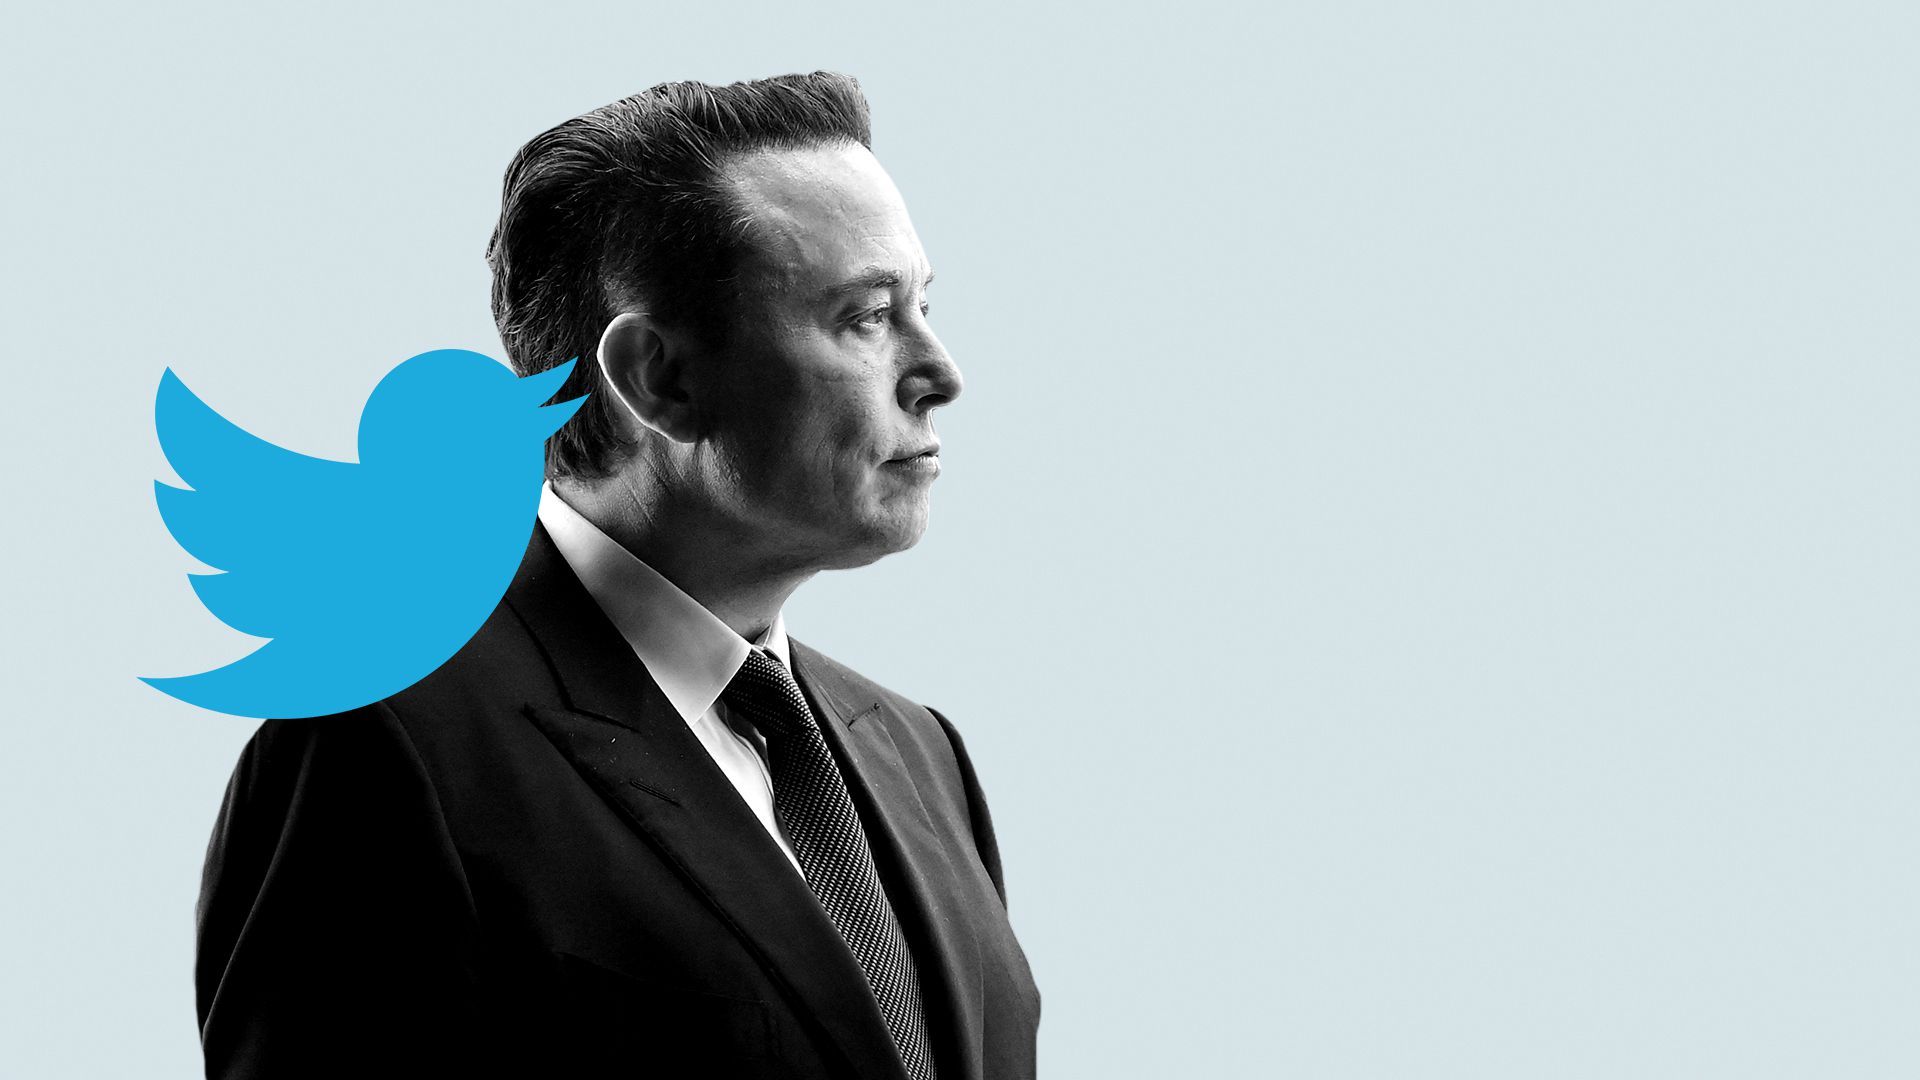 Photo illustration of Elon Musk with the Twitter logo bird on his shoulder